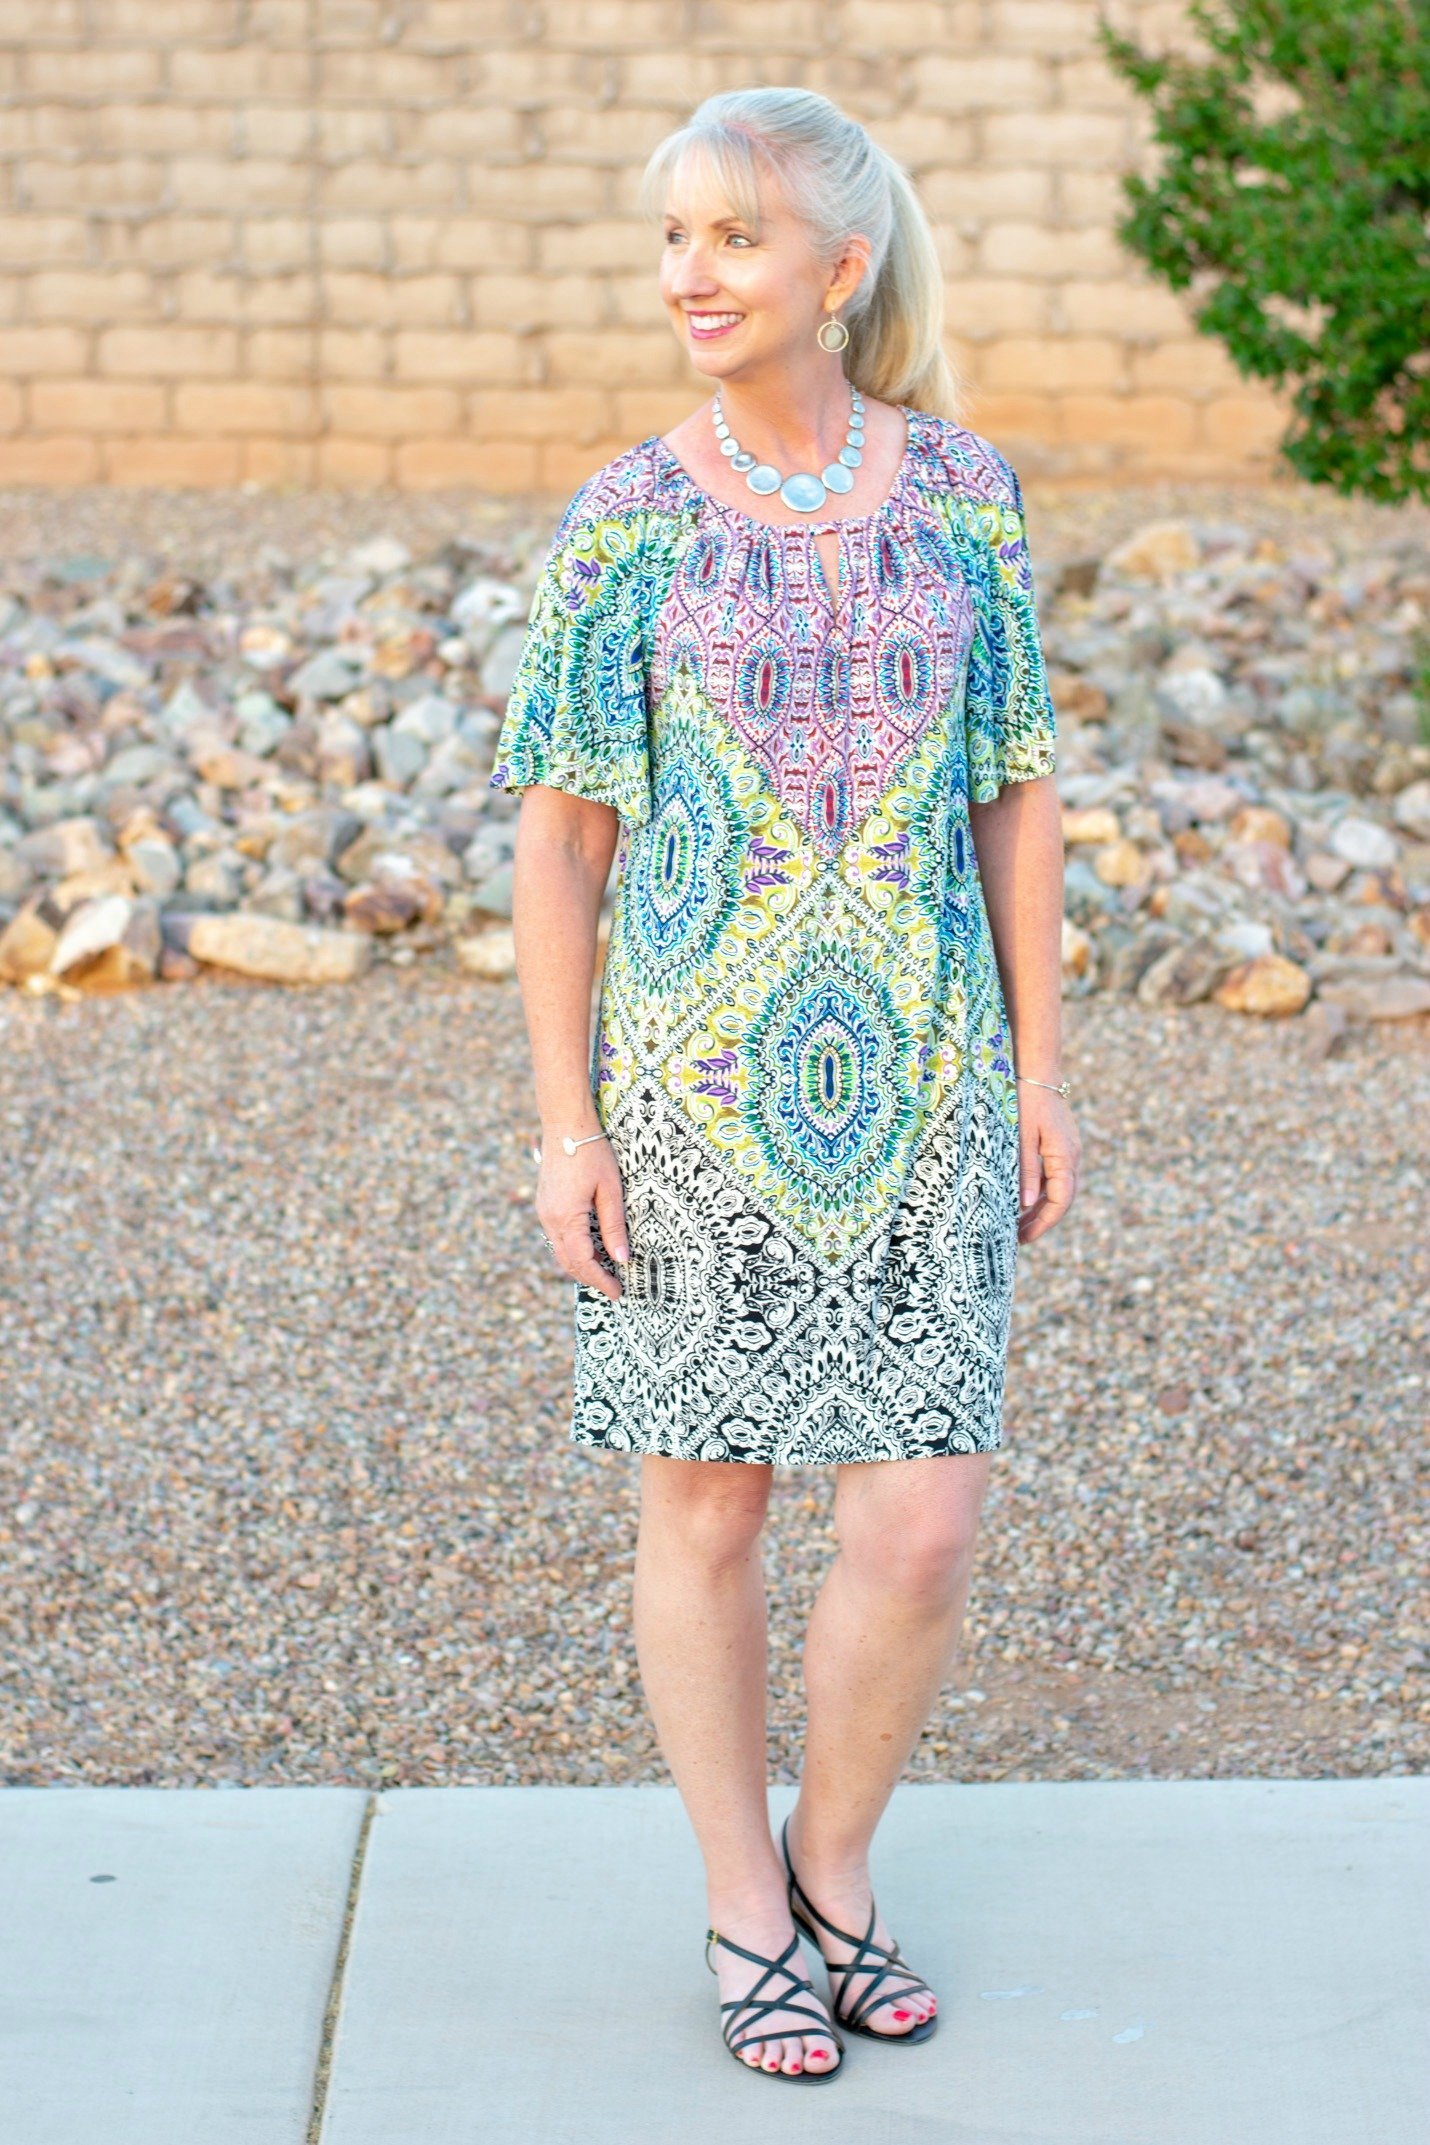 Medallion Print Dress for Chico's for ease and style